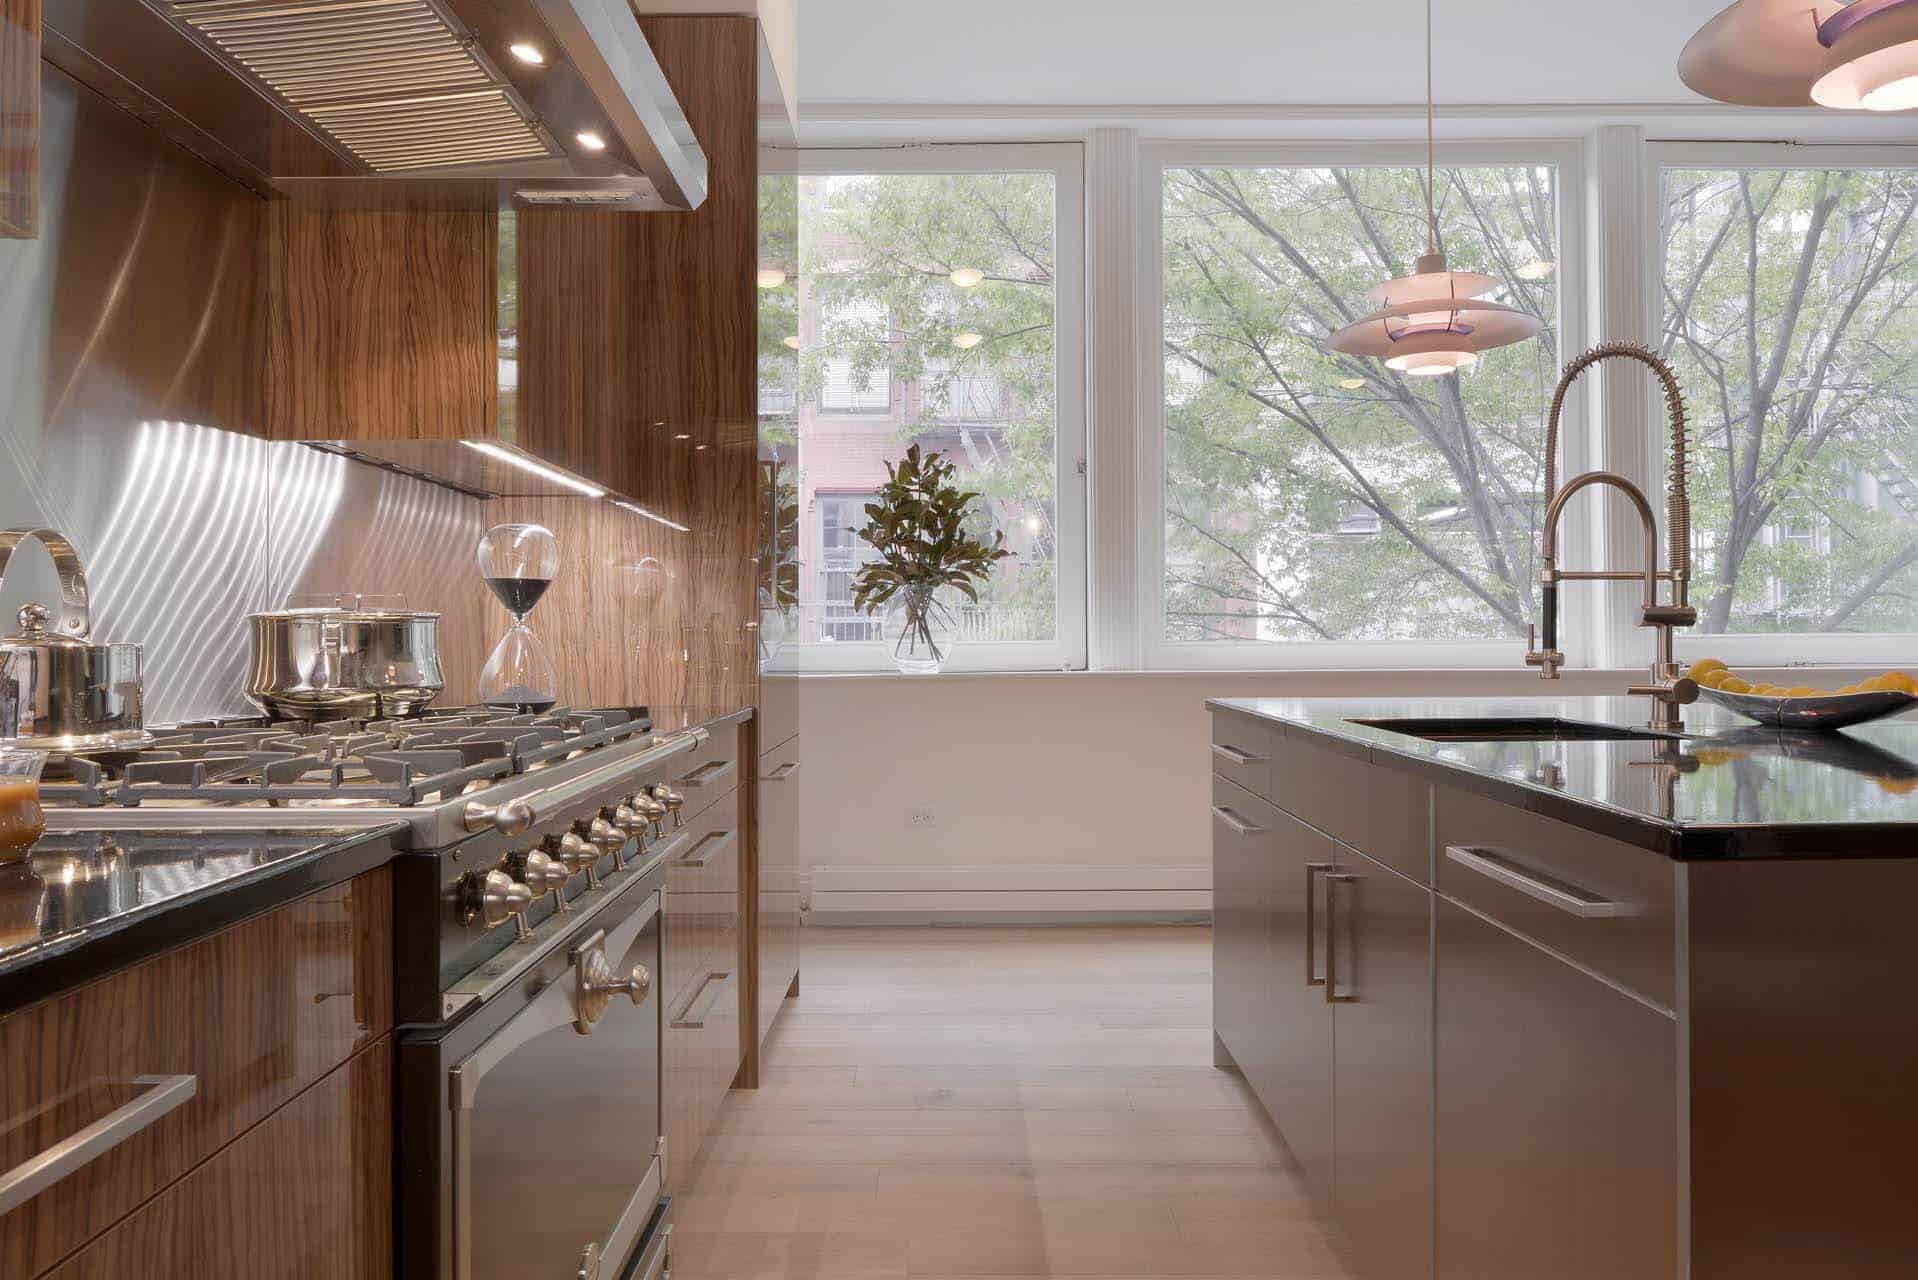 European-inspired NYC contemporary kitchen features an Alumasteel island and high gloss olivewood Artcraft cabinetry.